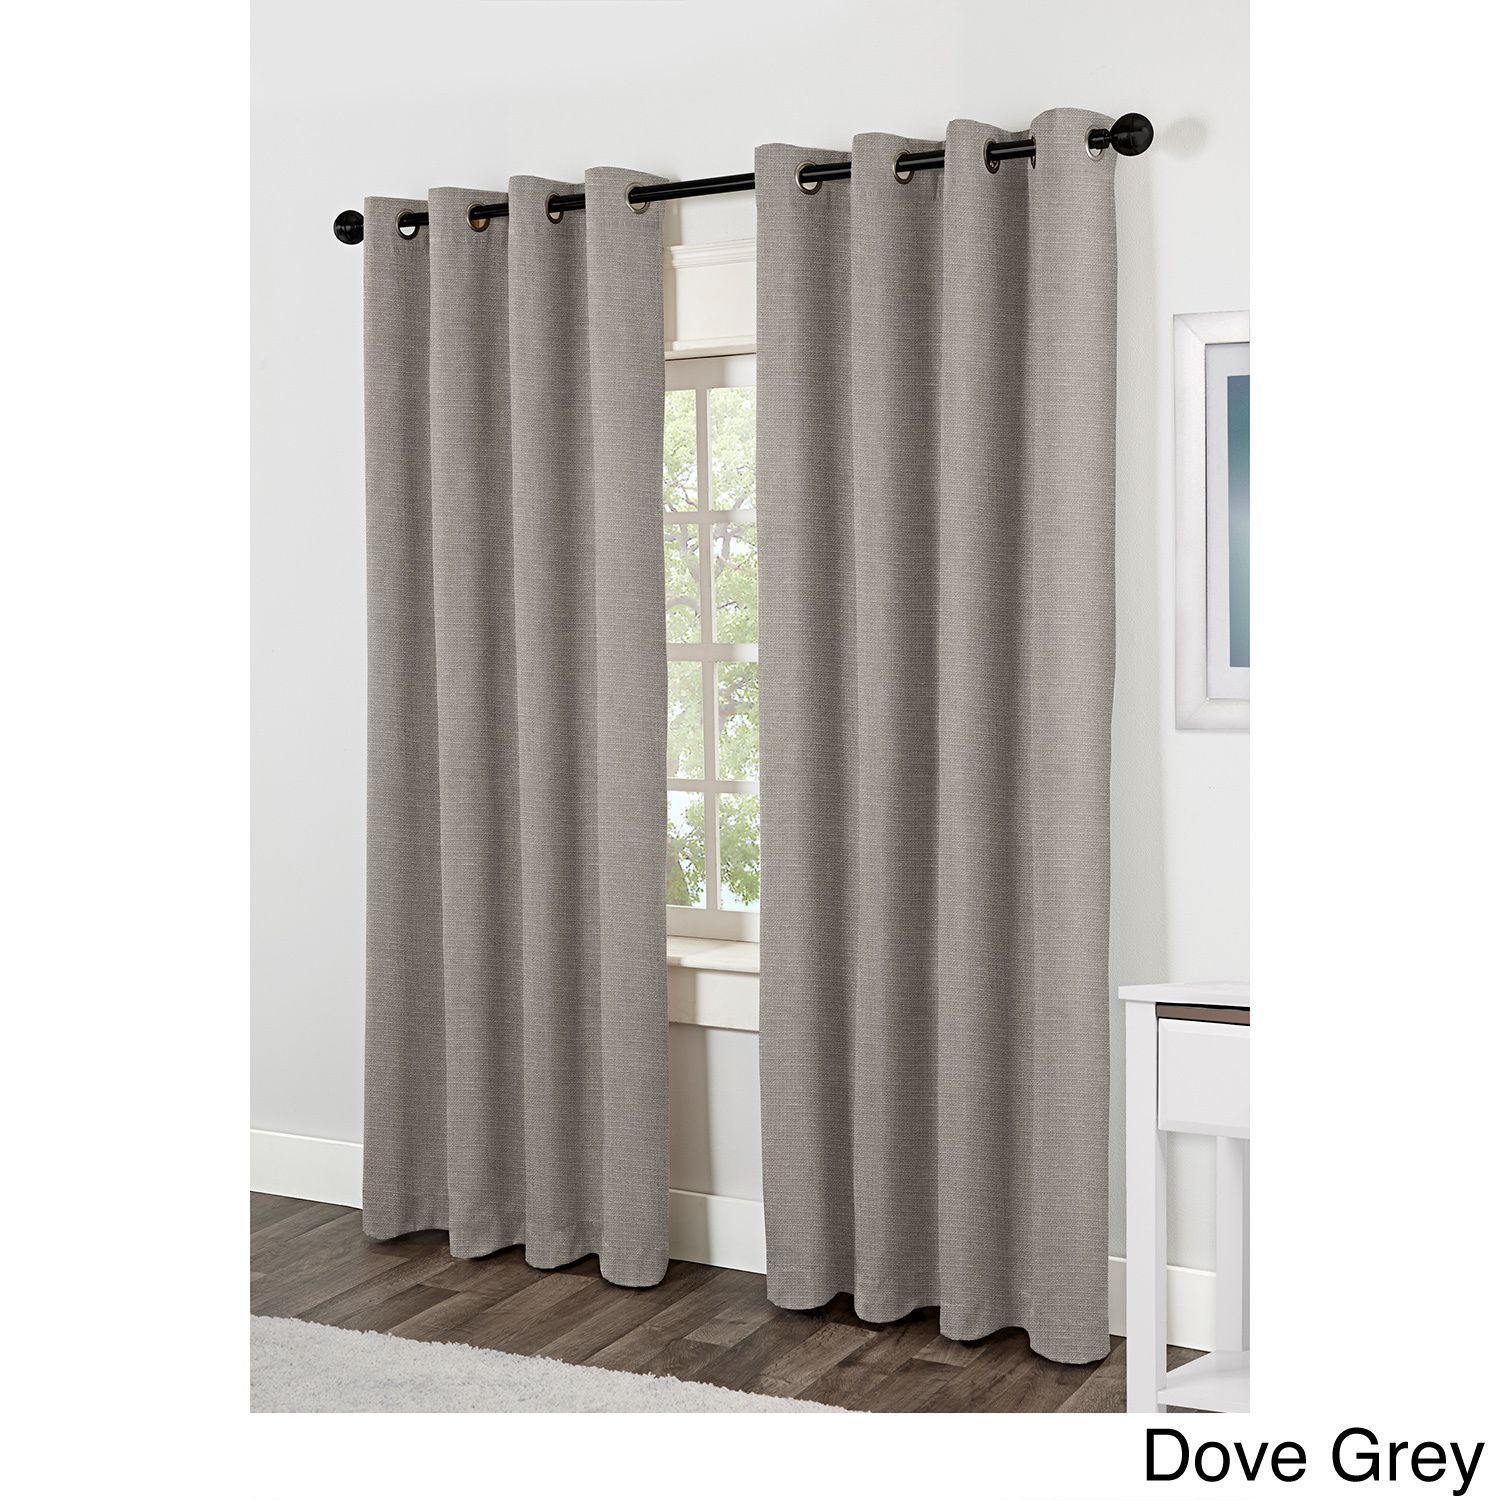 Ati Home Jakarta Grommet Top Curtain Panel Pair | Products Throughout Twig Insulated Blackout Curtain Panel Pairs With Grommet Top (View 27 of 30)